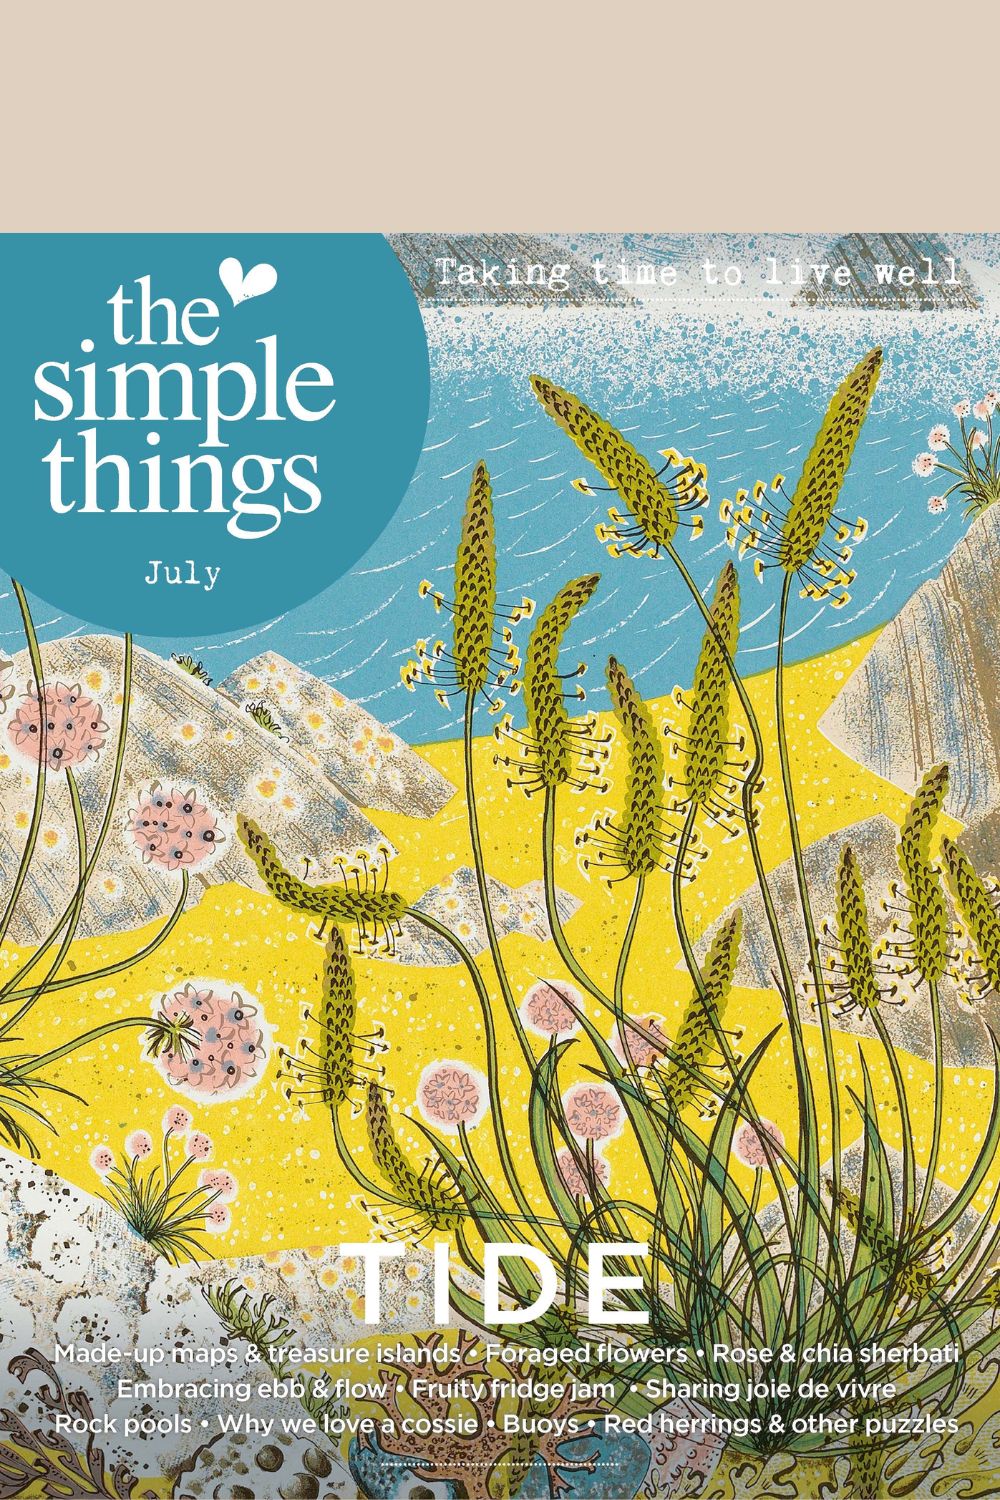 The Simple Things July issue &#39;Tide&#39; (illustration by Angie Lewin)